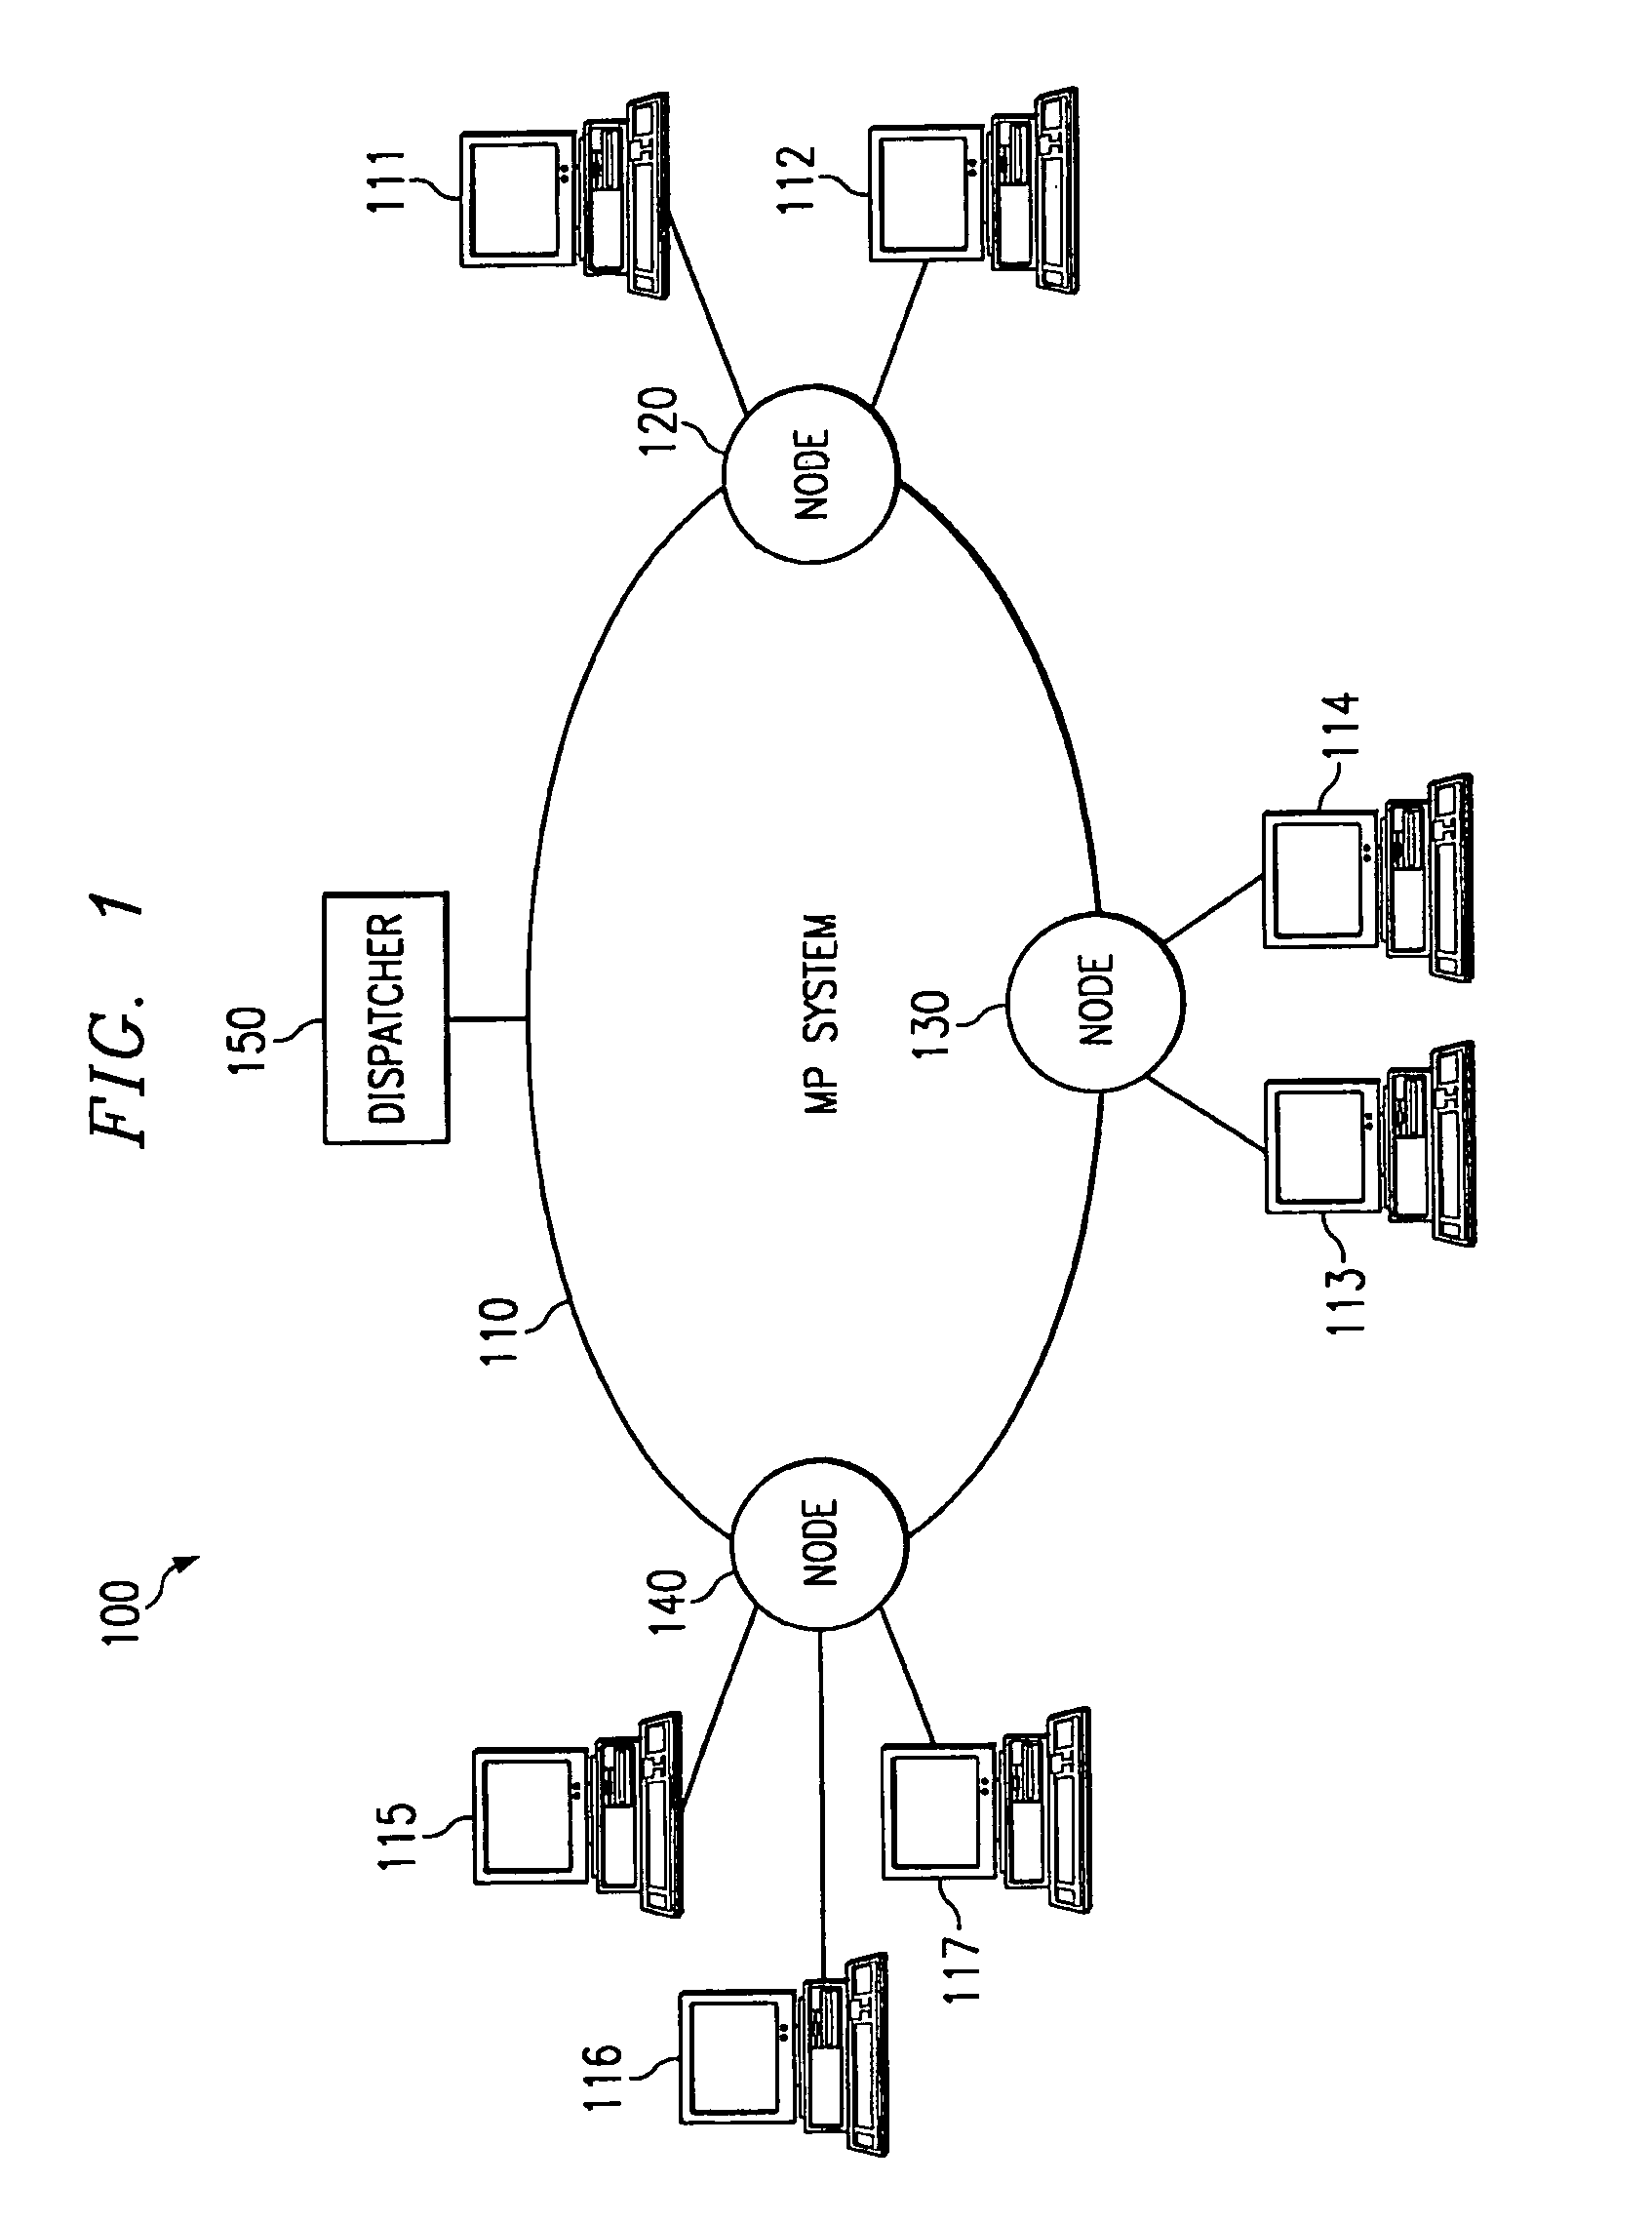 Apparatus for minimizing lock contention in a multiple processor system with multiple run queues when determining the threads priorities